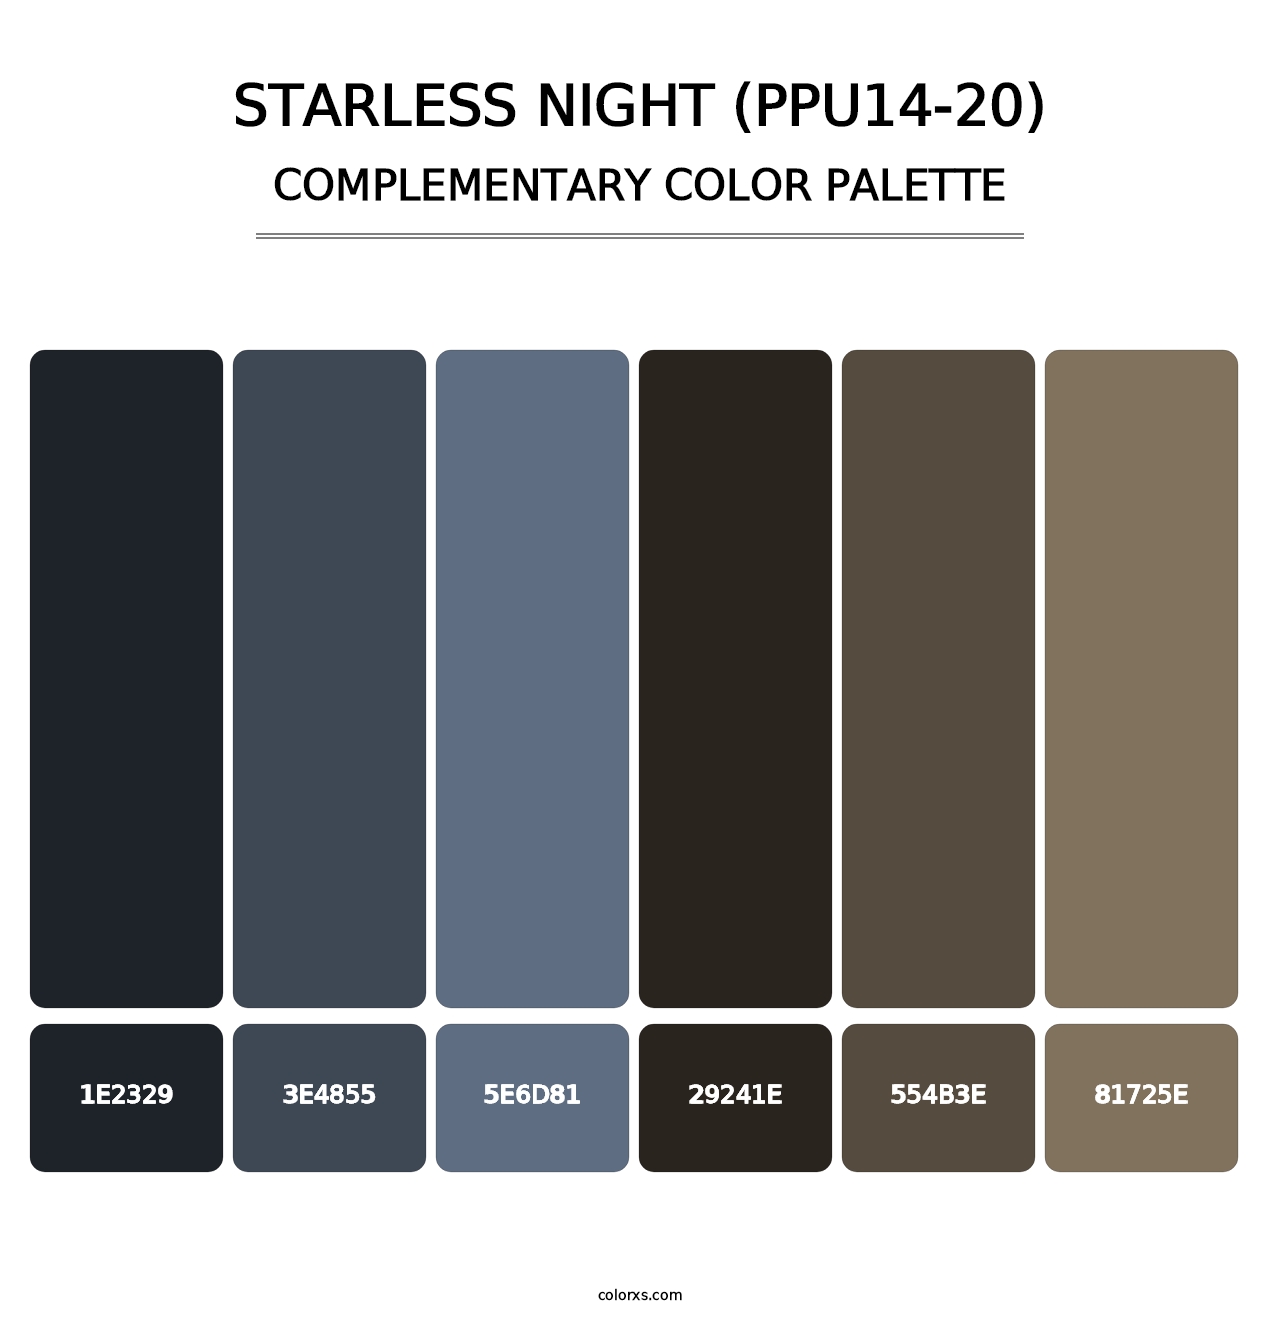 Starless Night (PPU14-20) - Complementary Color Palette